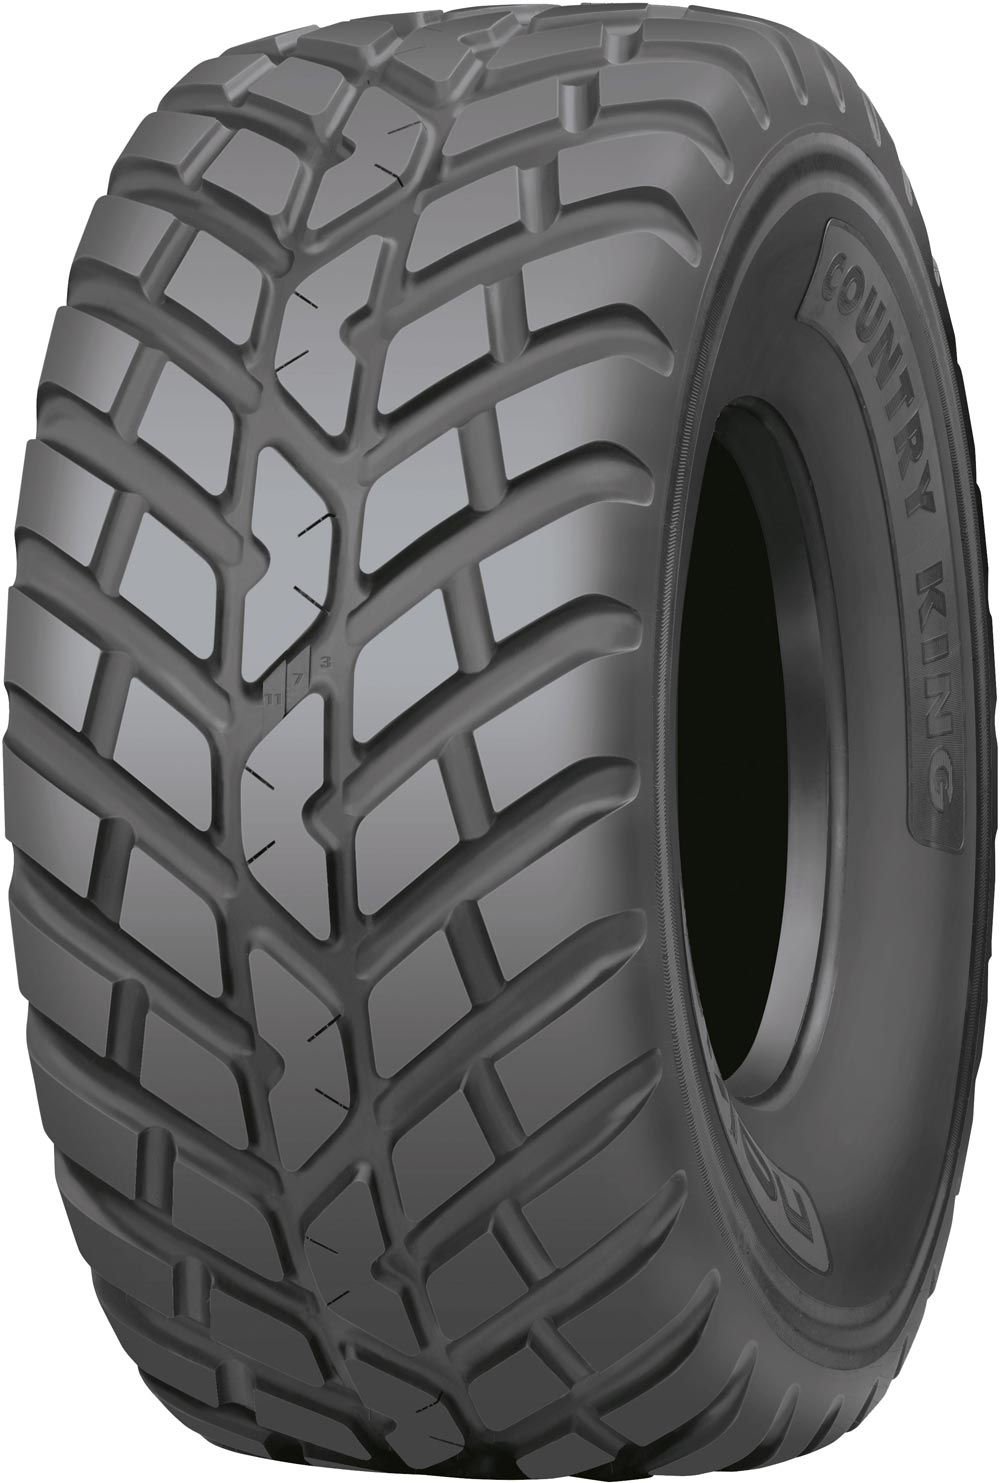 Индустриални гуми NOKIAN COUNTRY KING TL 750/60 R30.5 181D